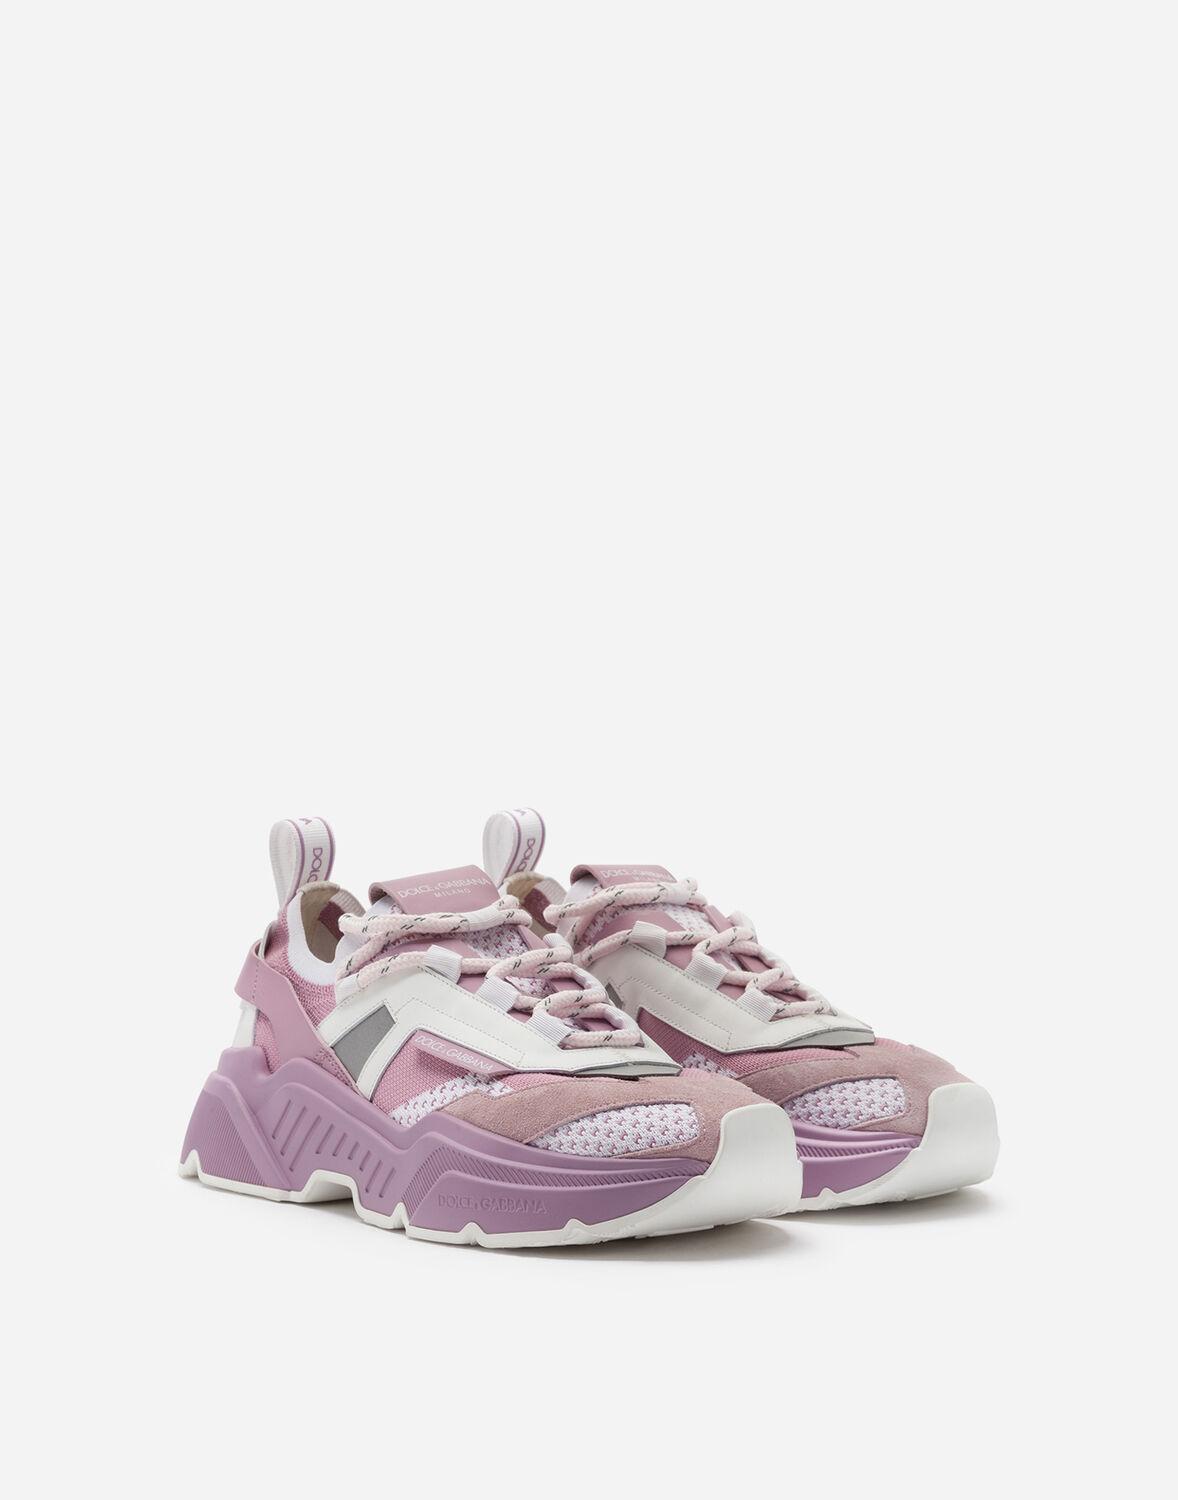 Dolce & Gabbana Leather Stretch Mesh Daymaster Sneakers in Pink - Lyst